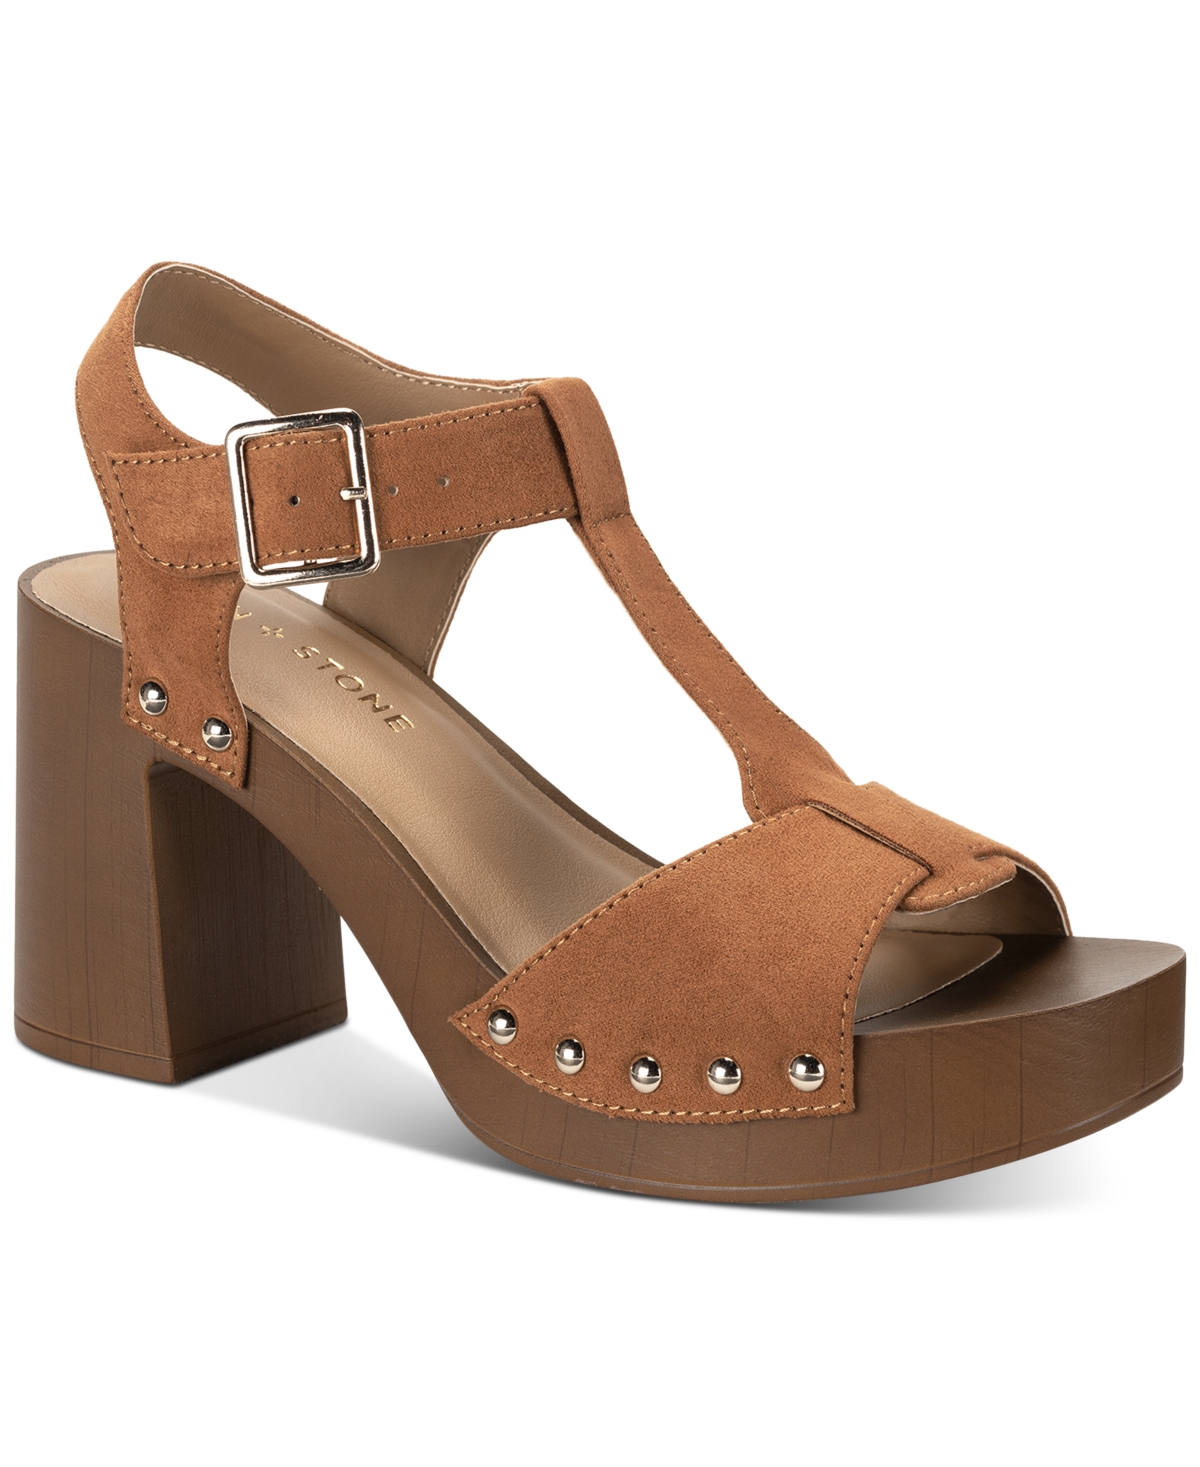 Twinniee T-Strap Studded Platform Sandals, Created for Macy's - Whiskey Micro